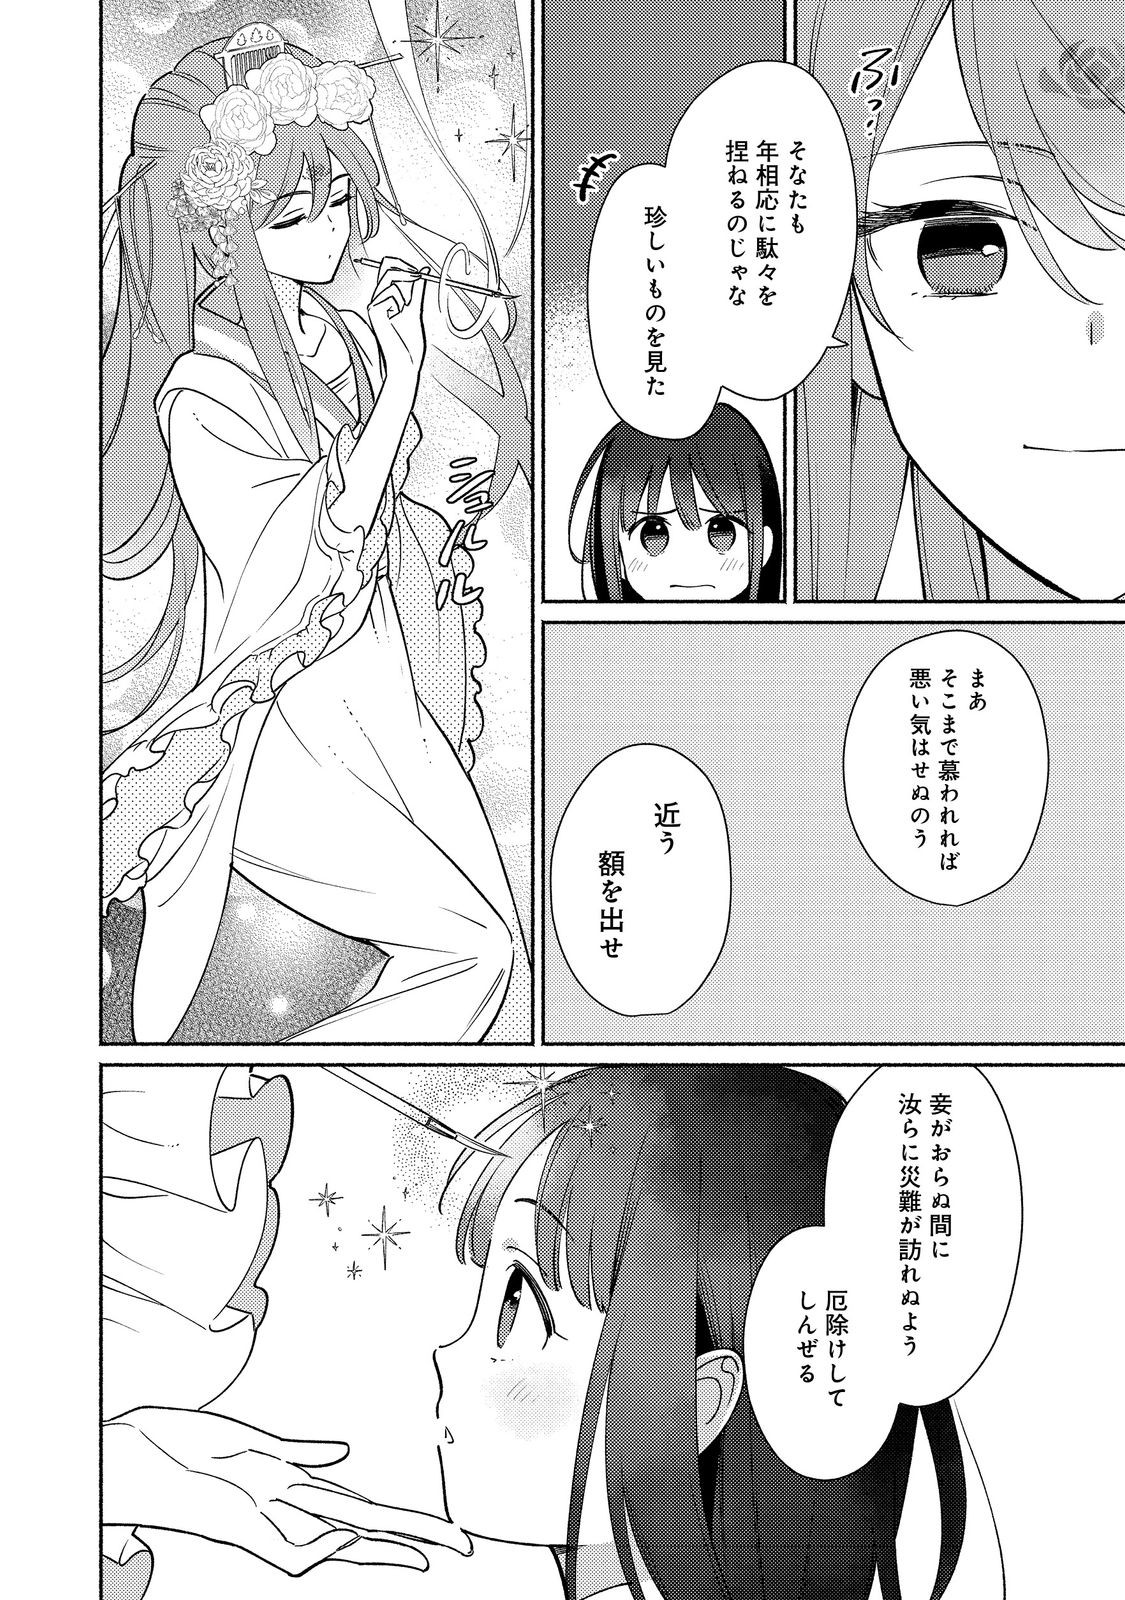 I’m the White Pig Nobleman 第20.2話 - Page 15